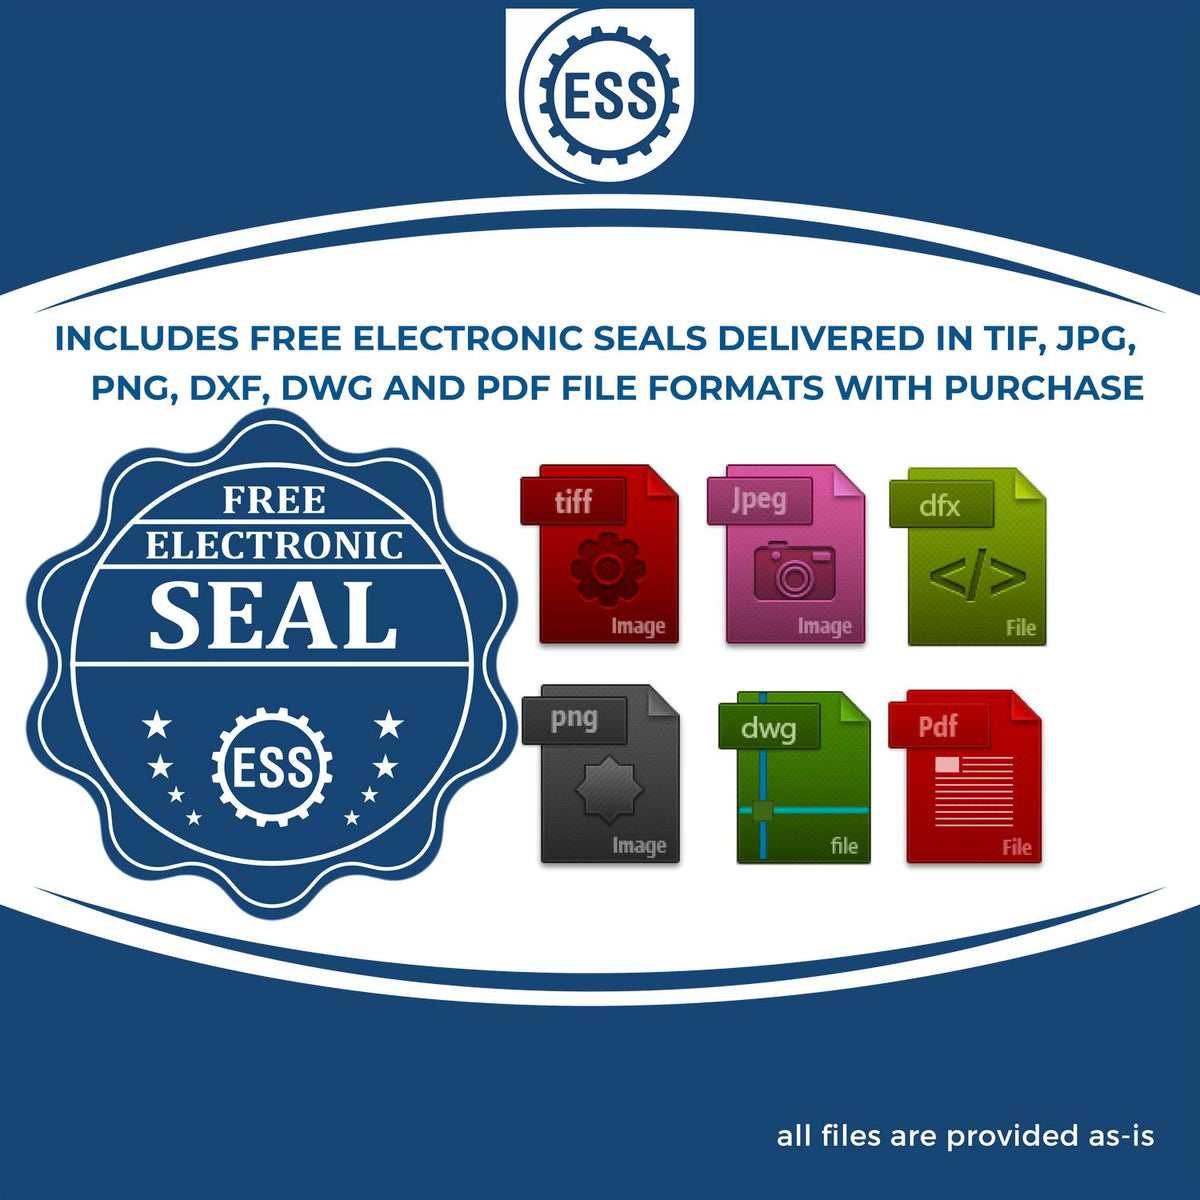 An infographic for the free electronic seal for the Soft Arkansas Professional Engineer Seal illustrating the different file type icons such as DXF, DWG, TIF, JPG and PNG.